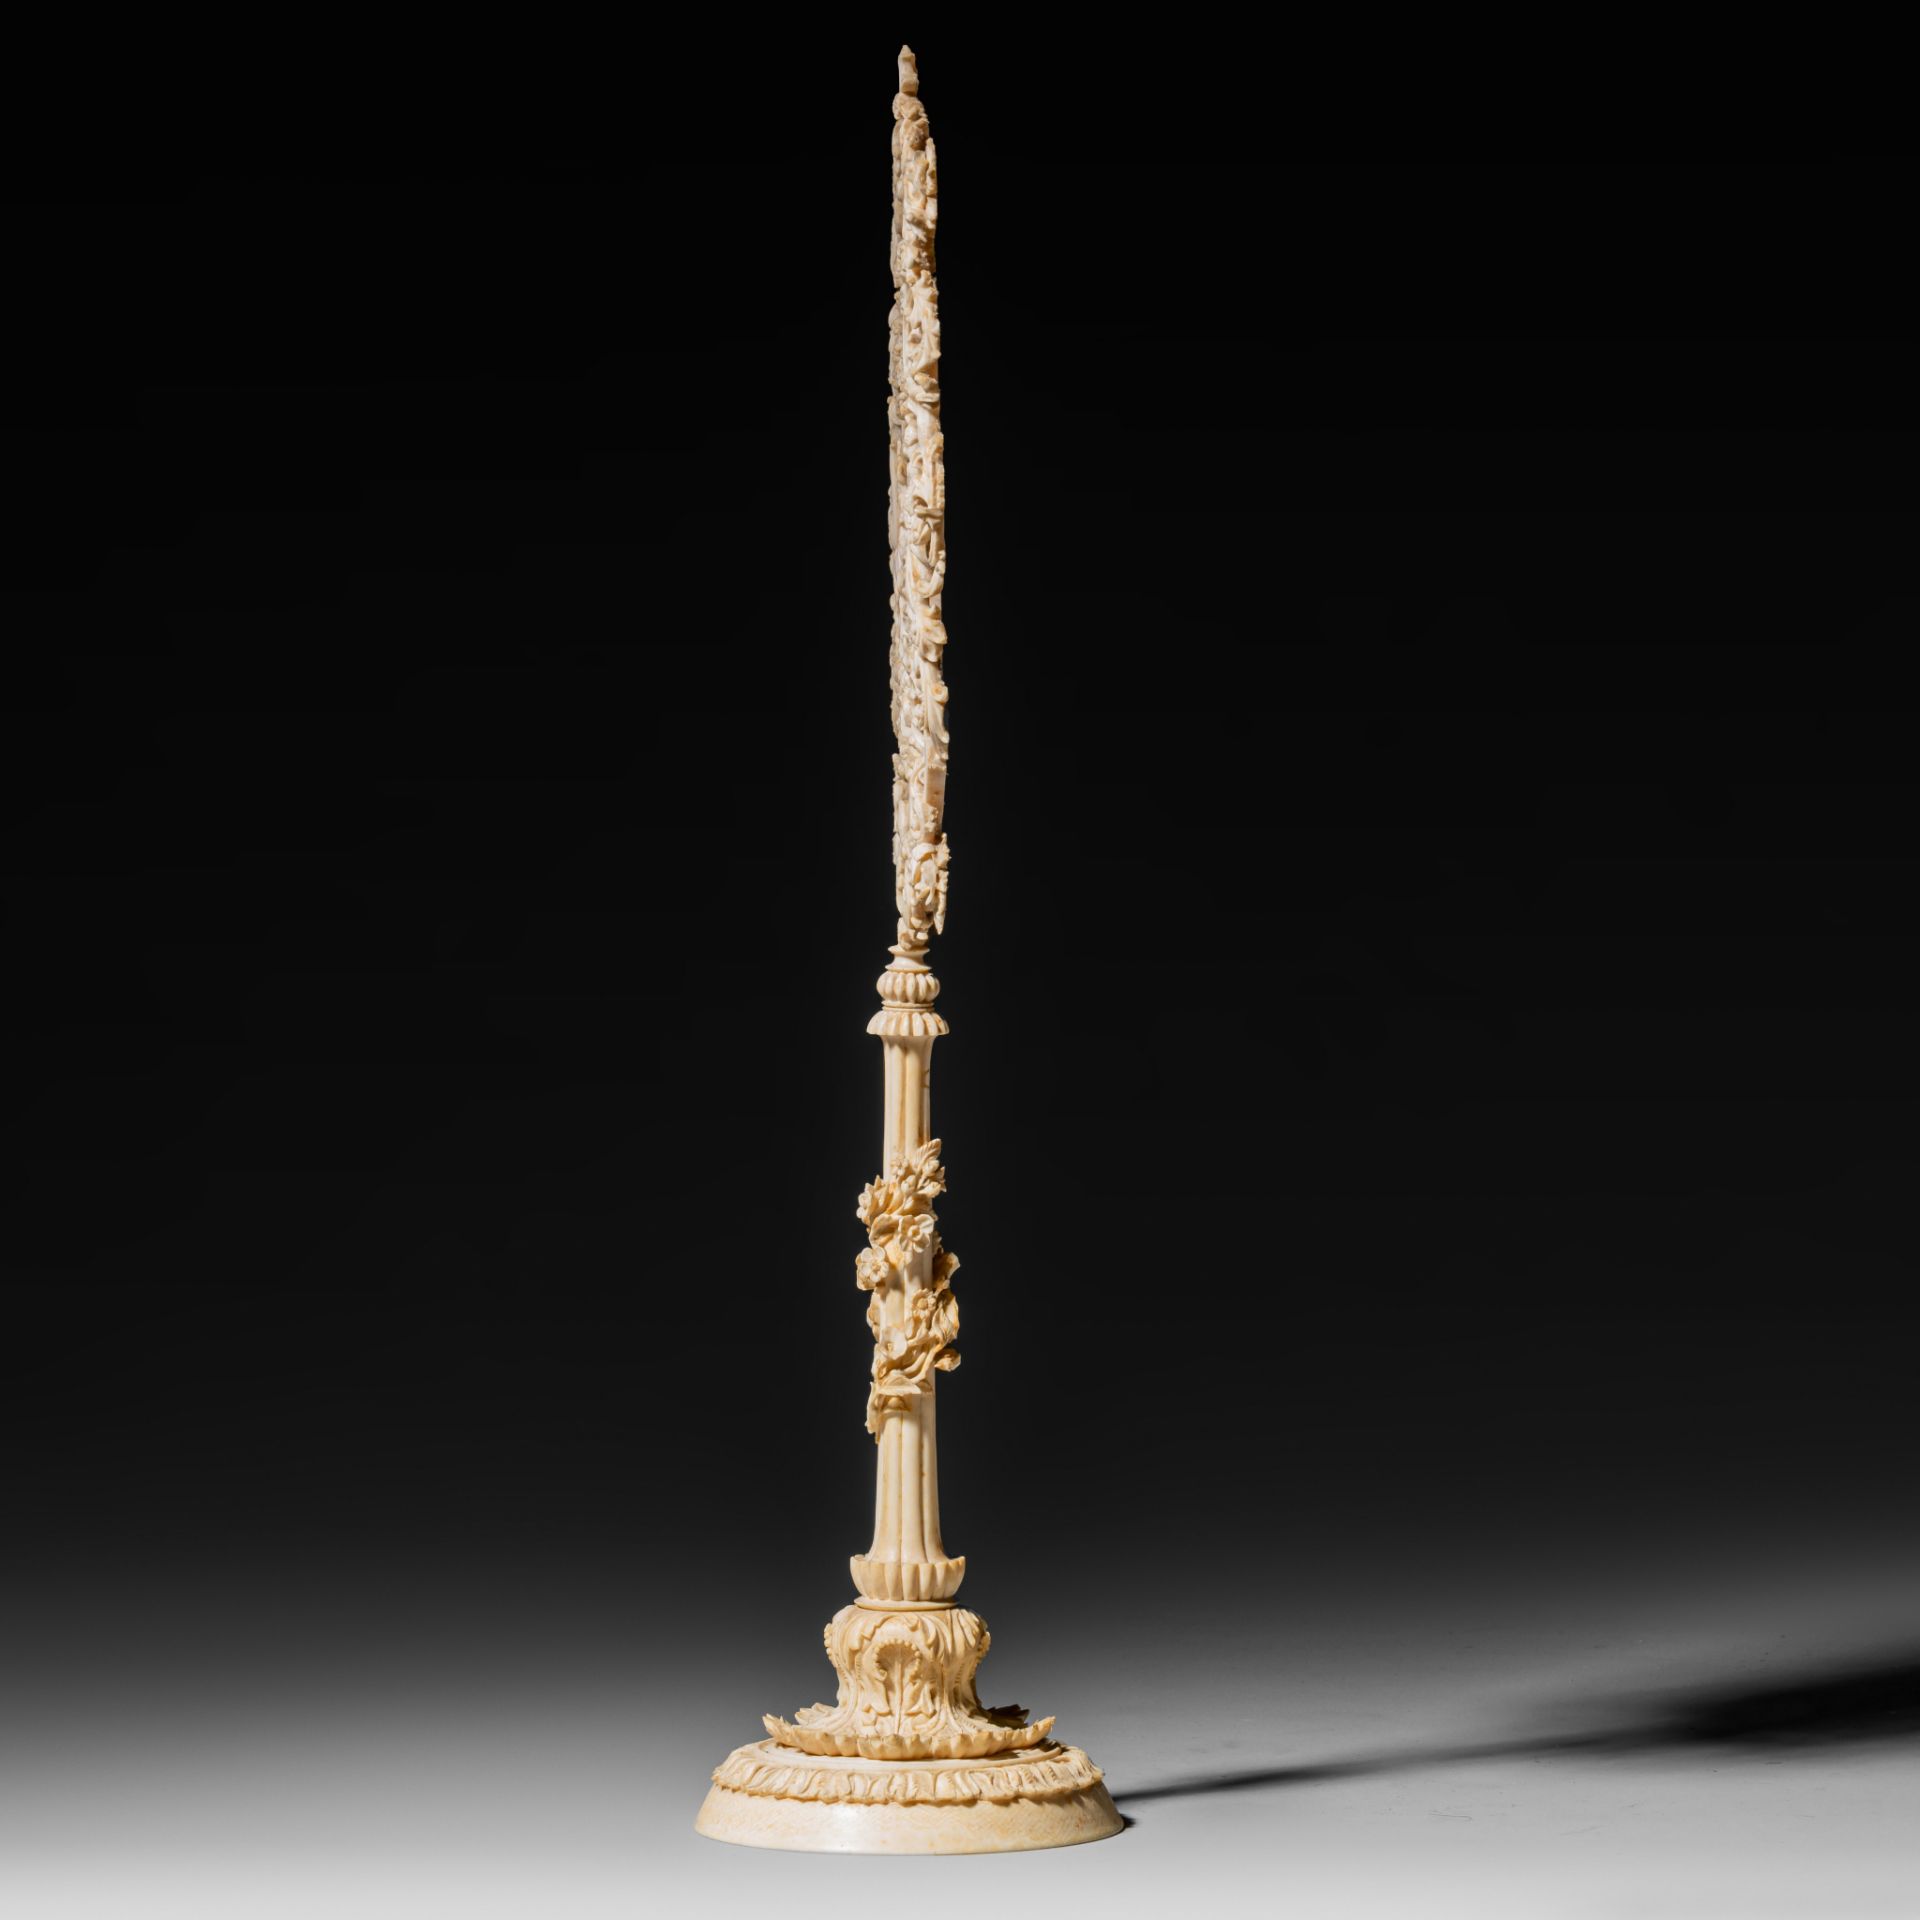 A 19thC, probably German, richly carved ivory candle screen, H 43,5 cm - 491 g (+) - Image 3 of 6